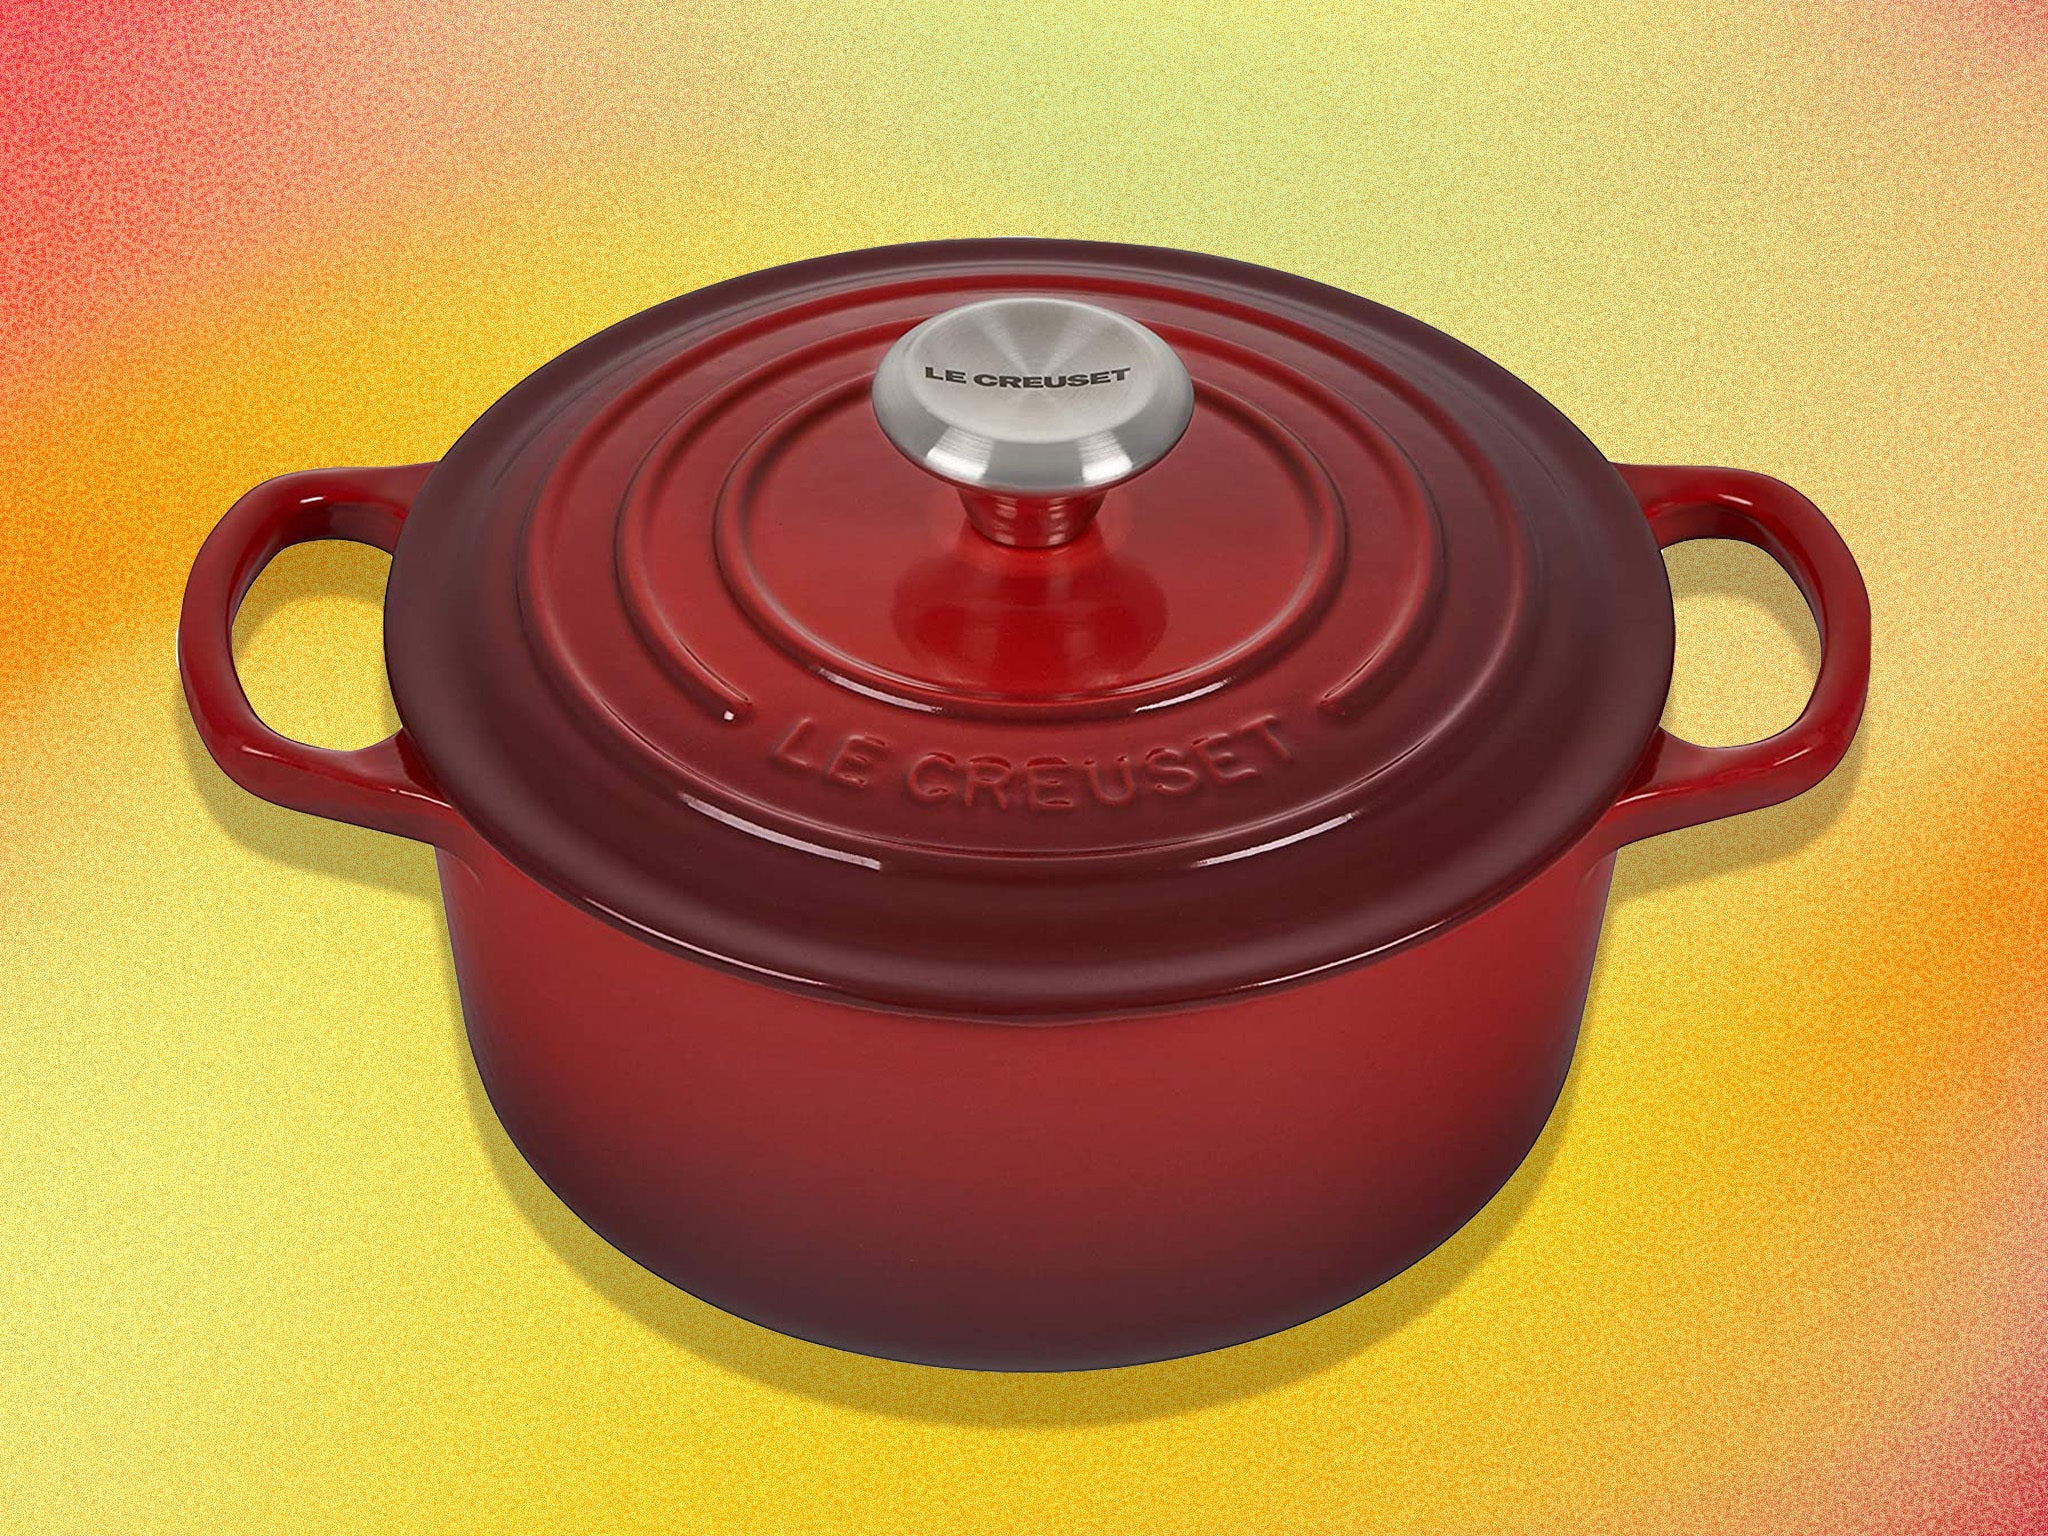 Le Creuset’s cookware is a kitchen must-have